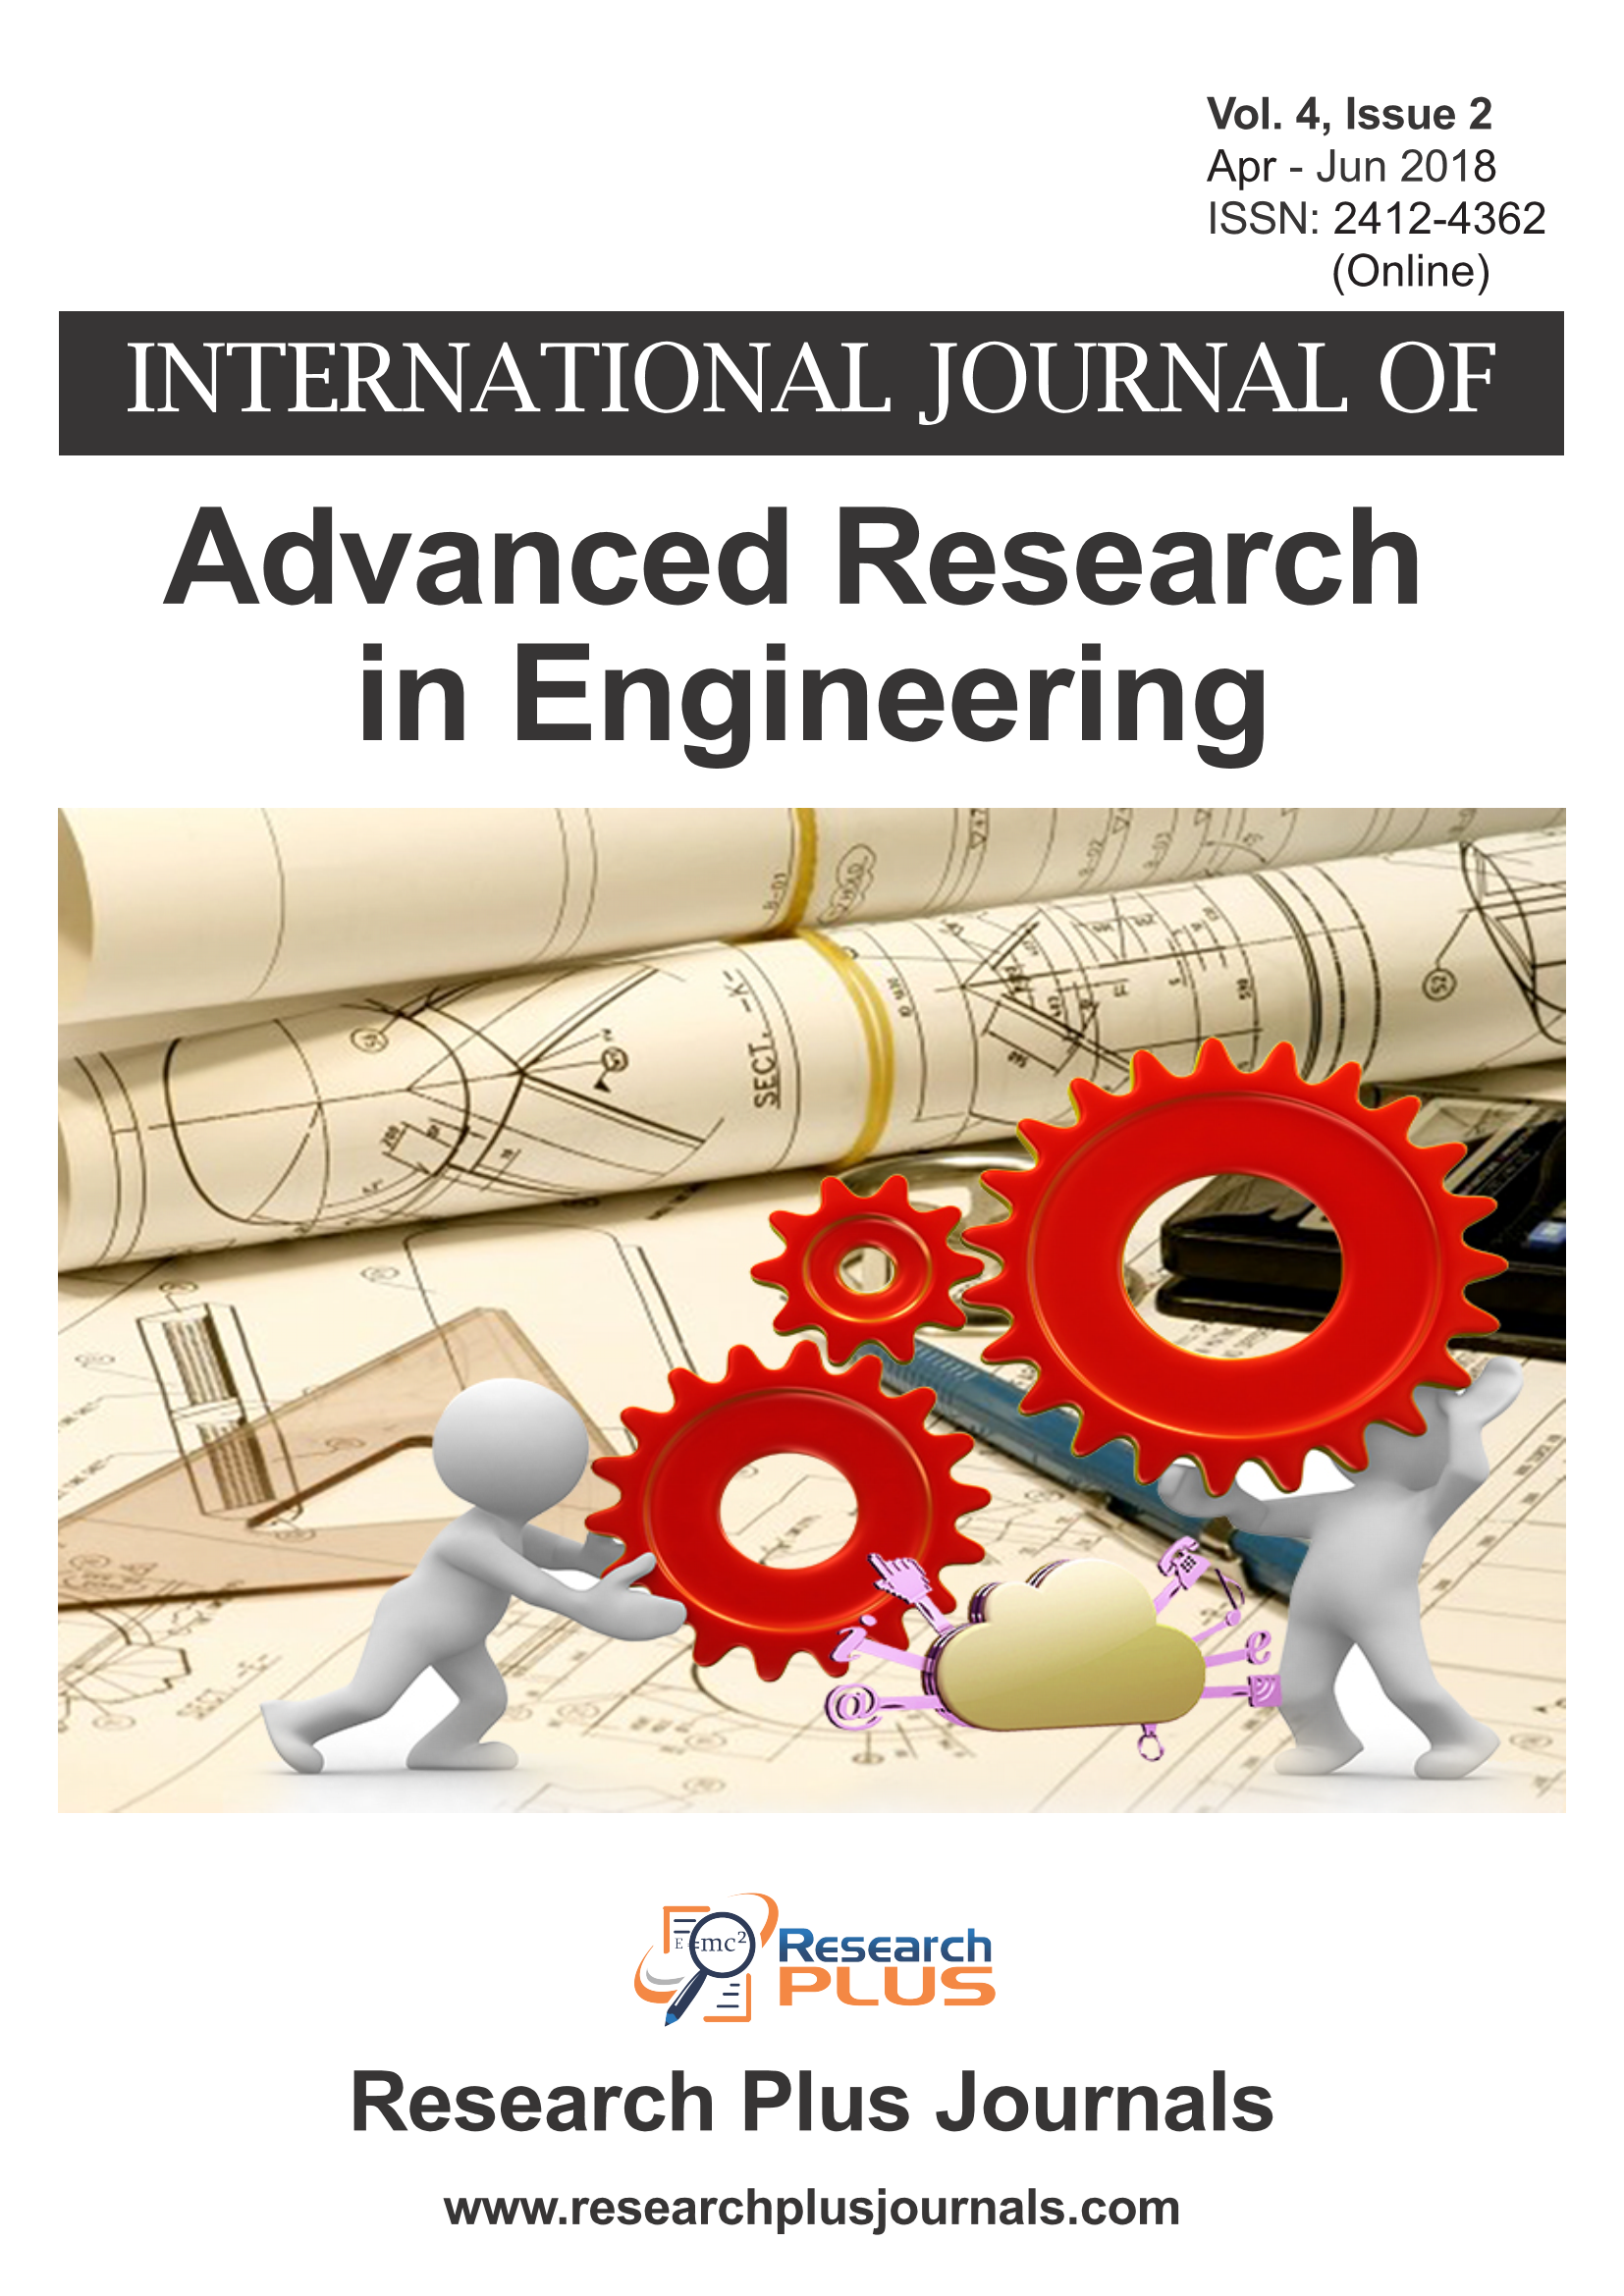 Volume 4, Issue 2, International Journal of Advanced Research in Engineering (IJARE)  (Online ISSN 2412-4362)